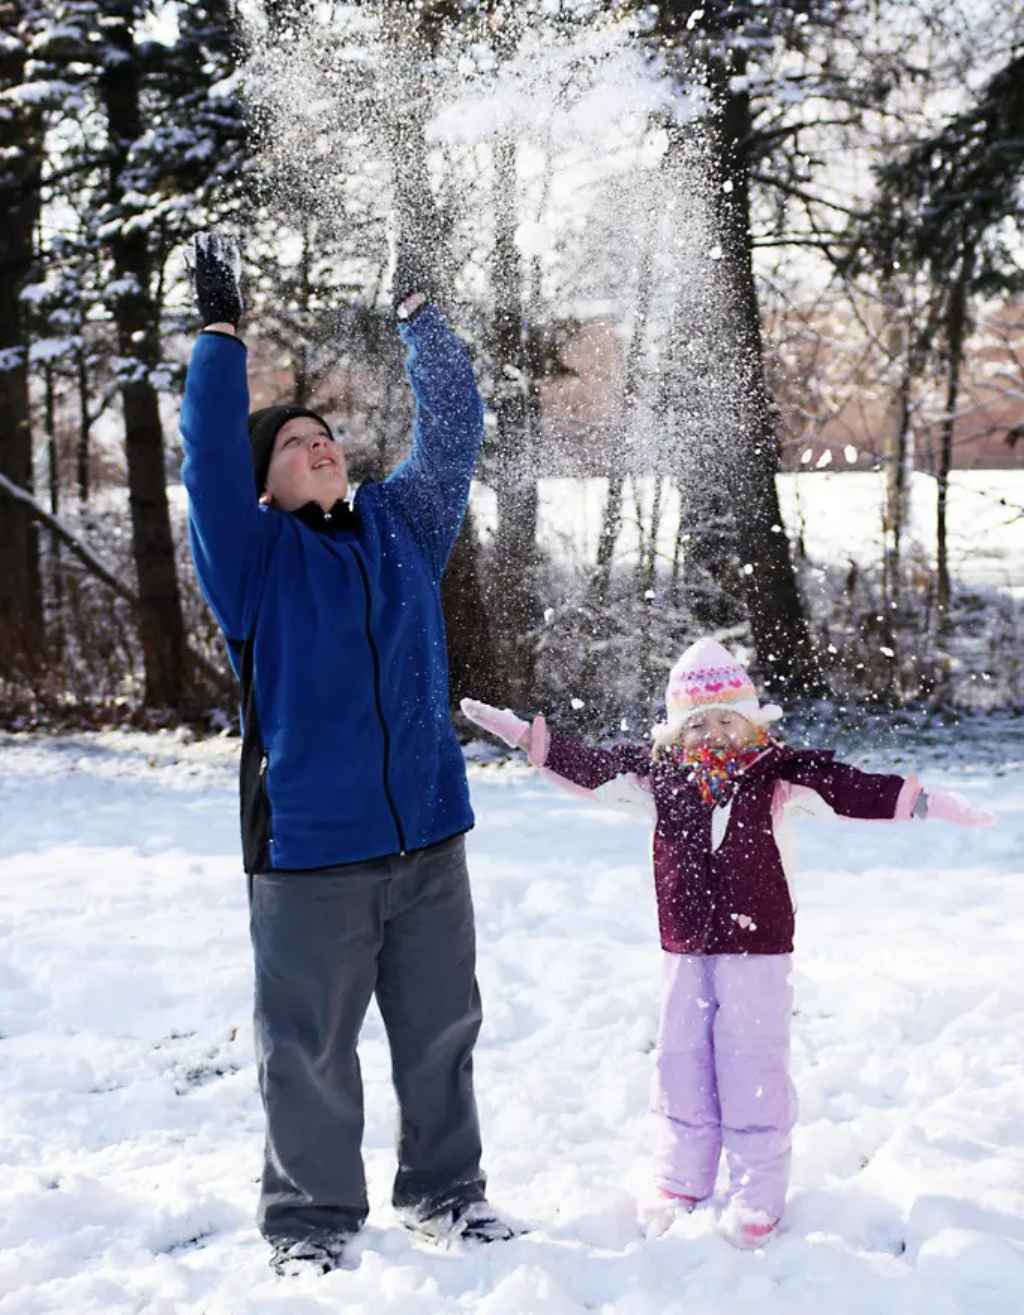 How To Make It Snow 7 Tricks To Make It Snow 8 Fun Things To Do In The Snow The Weather Tips Guide